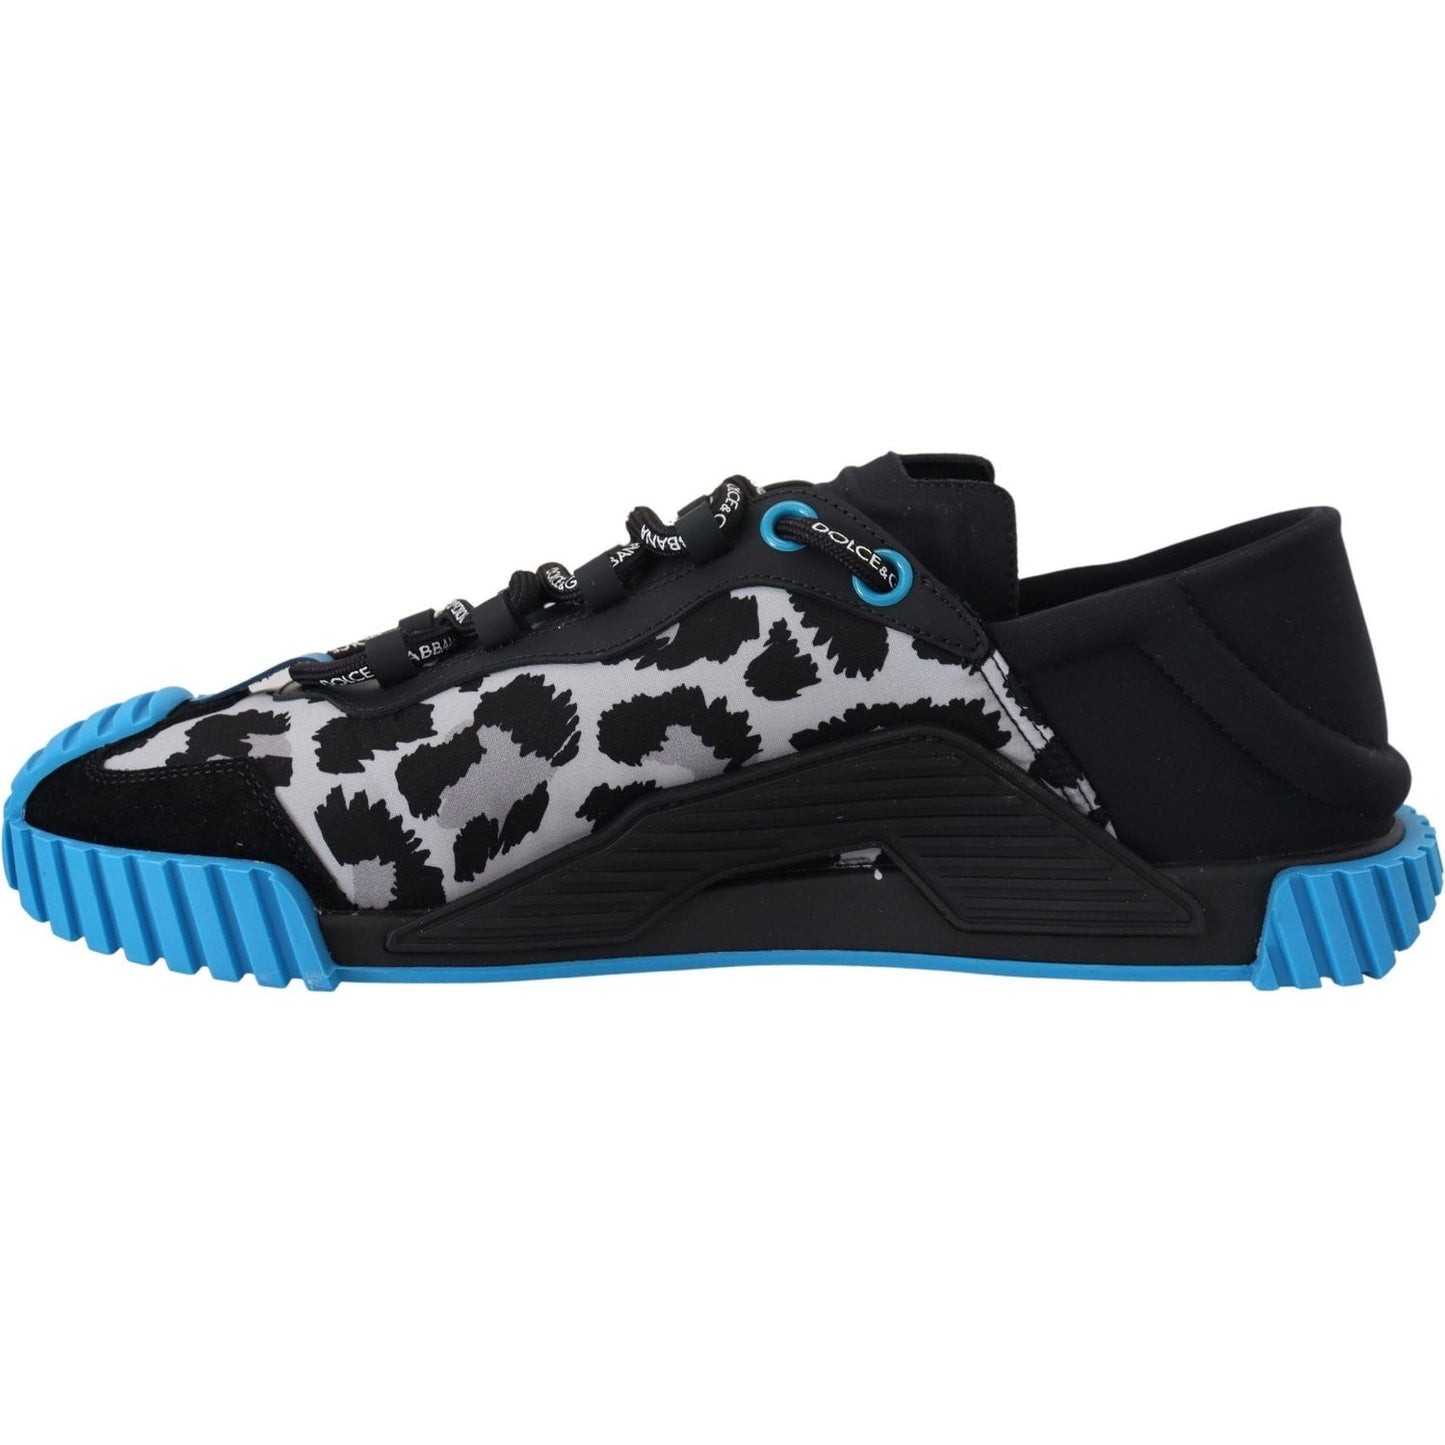 Dolce & Gabbana Elegant Black NS1 Leather Sneakers black-blue-fabric-lace-up-ns1-sneakers